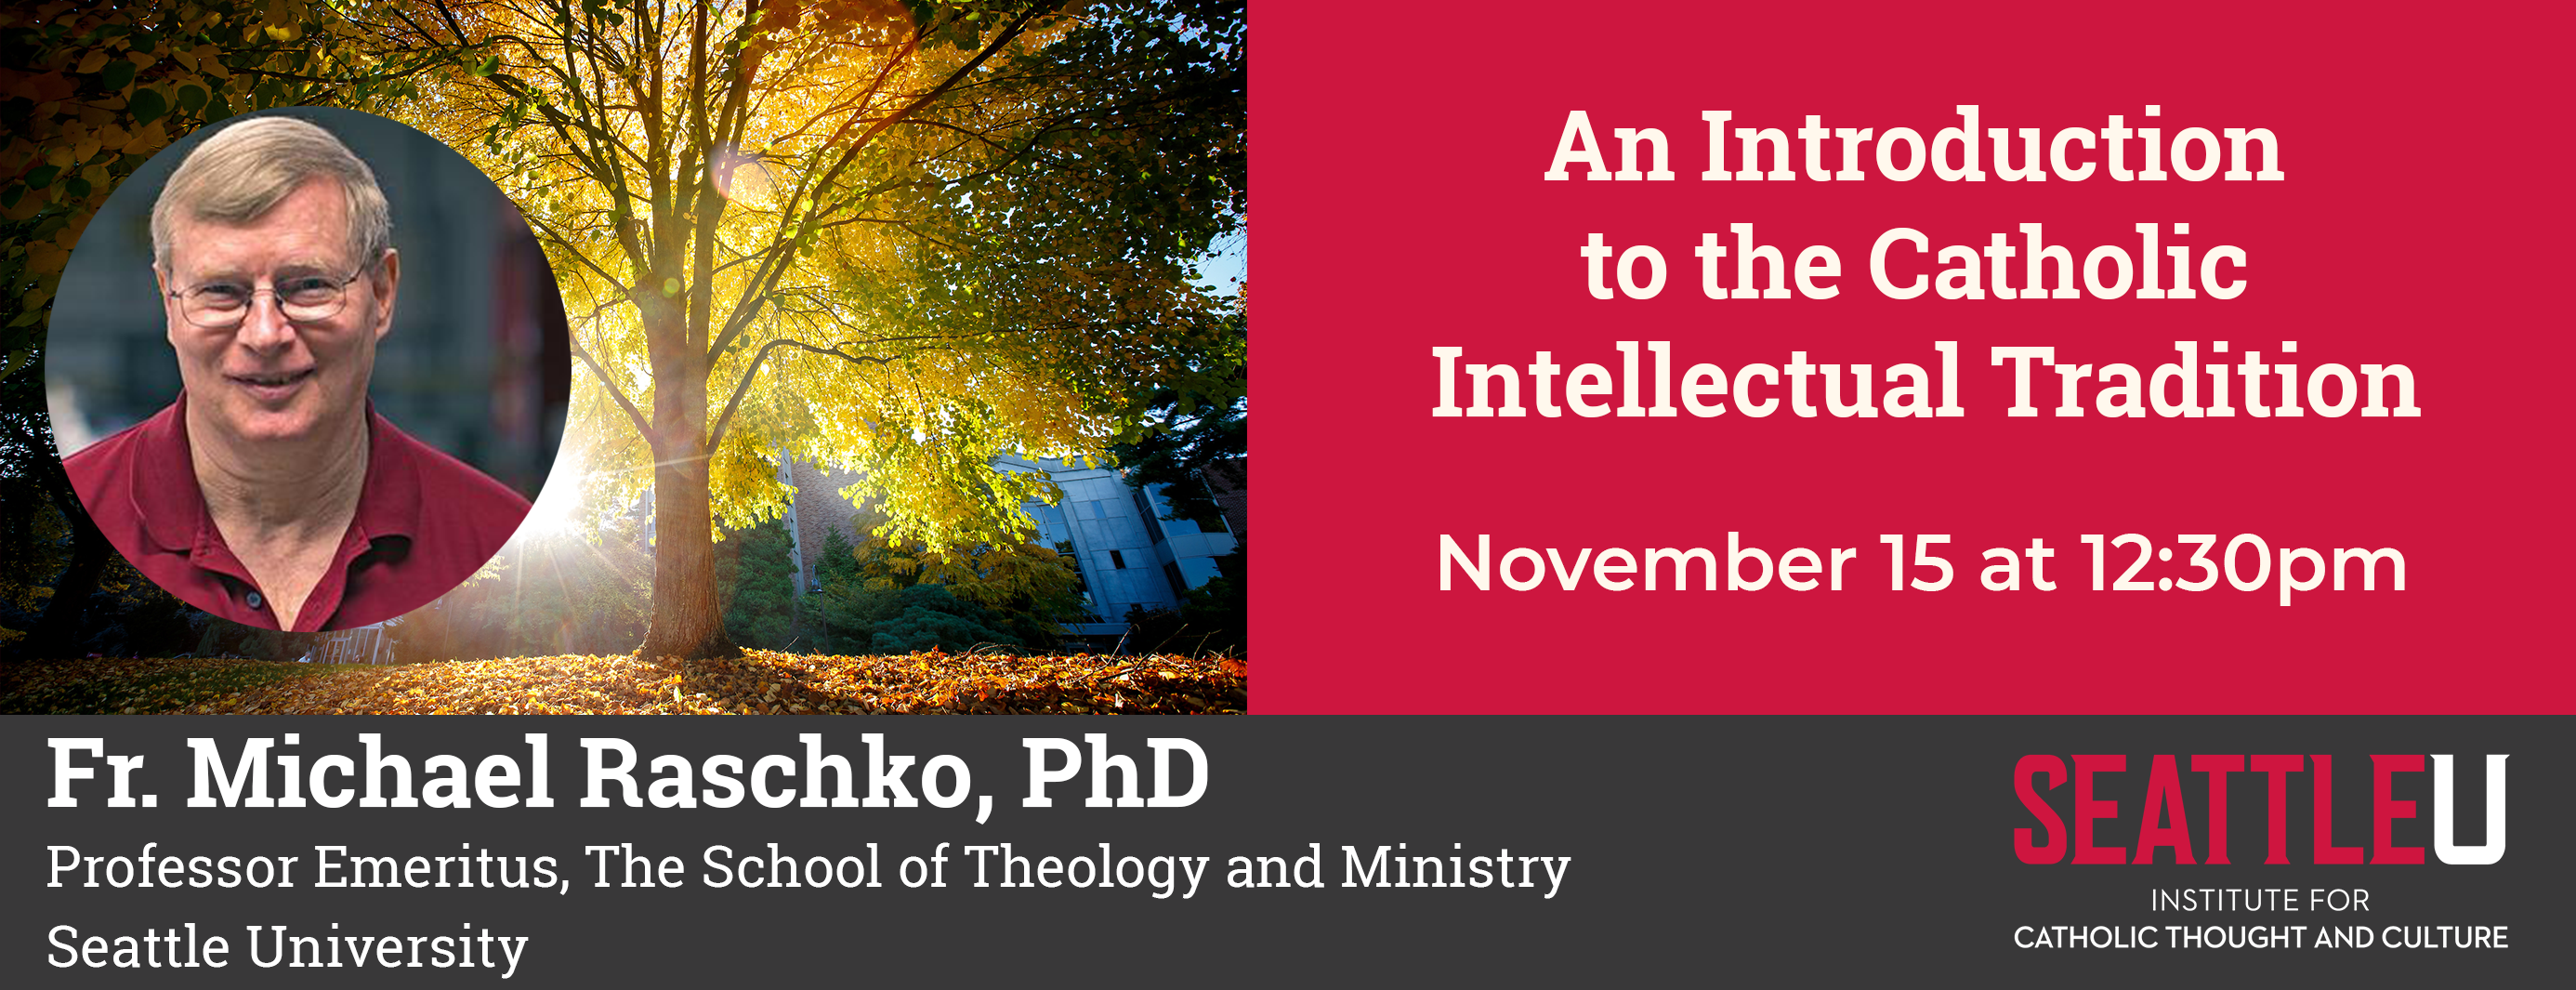 An Introduction to the Catholic Intellectual Tradition event header